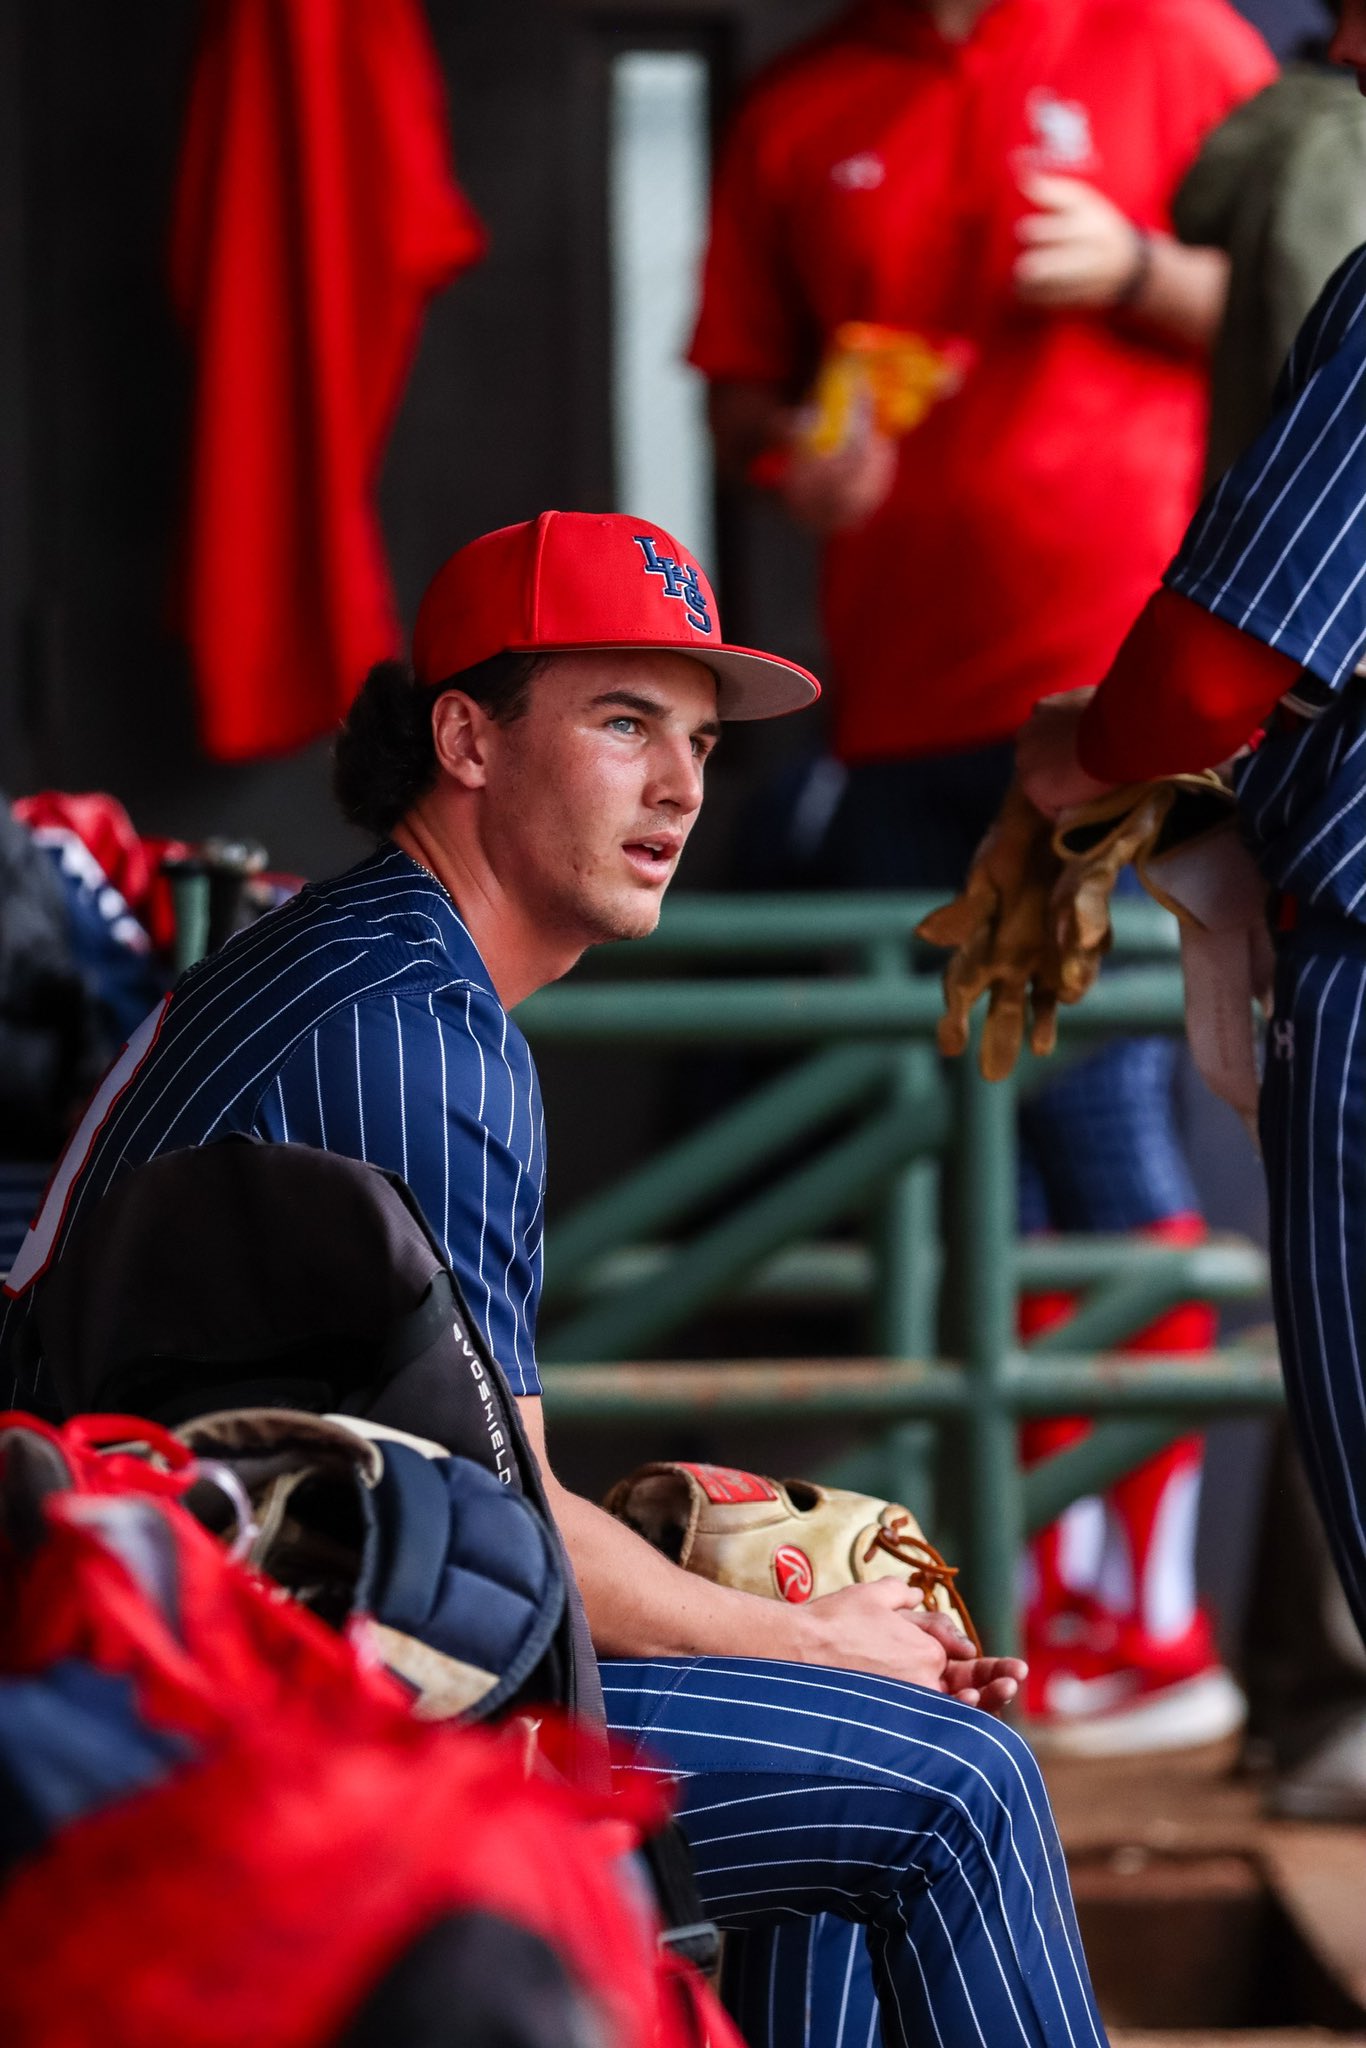 Lewisburg junior and Vanderbilt baseball commit Talon Haley struck out 10 batters over five innings of work in a victory over Houston (Tenn.) on Saturday, March 16 at Trustmark Park in Pearl, Miss.